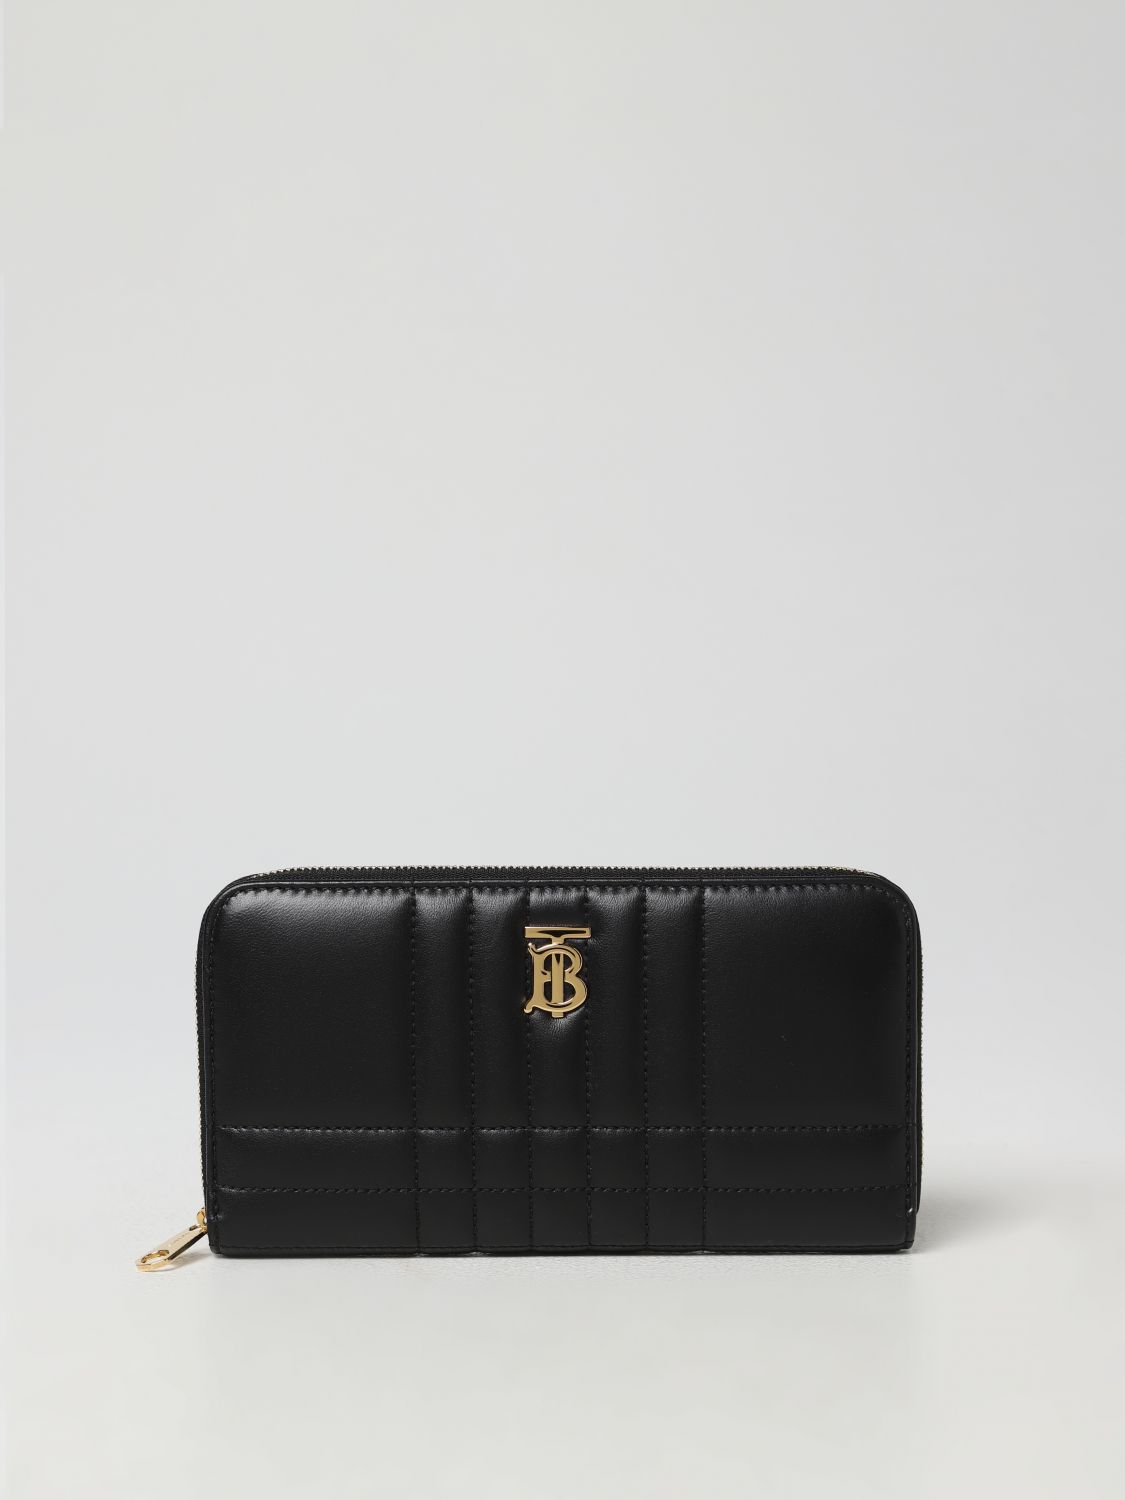 BURBERRY: Lola bag in quilted nappa leather - Black